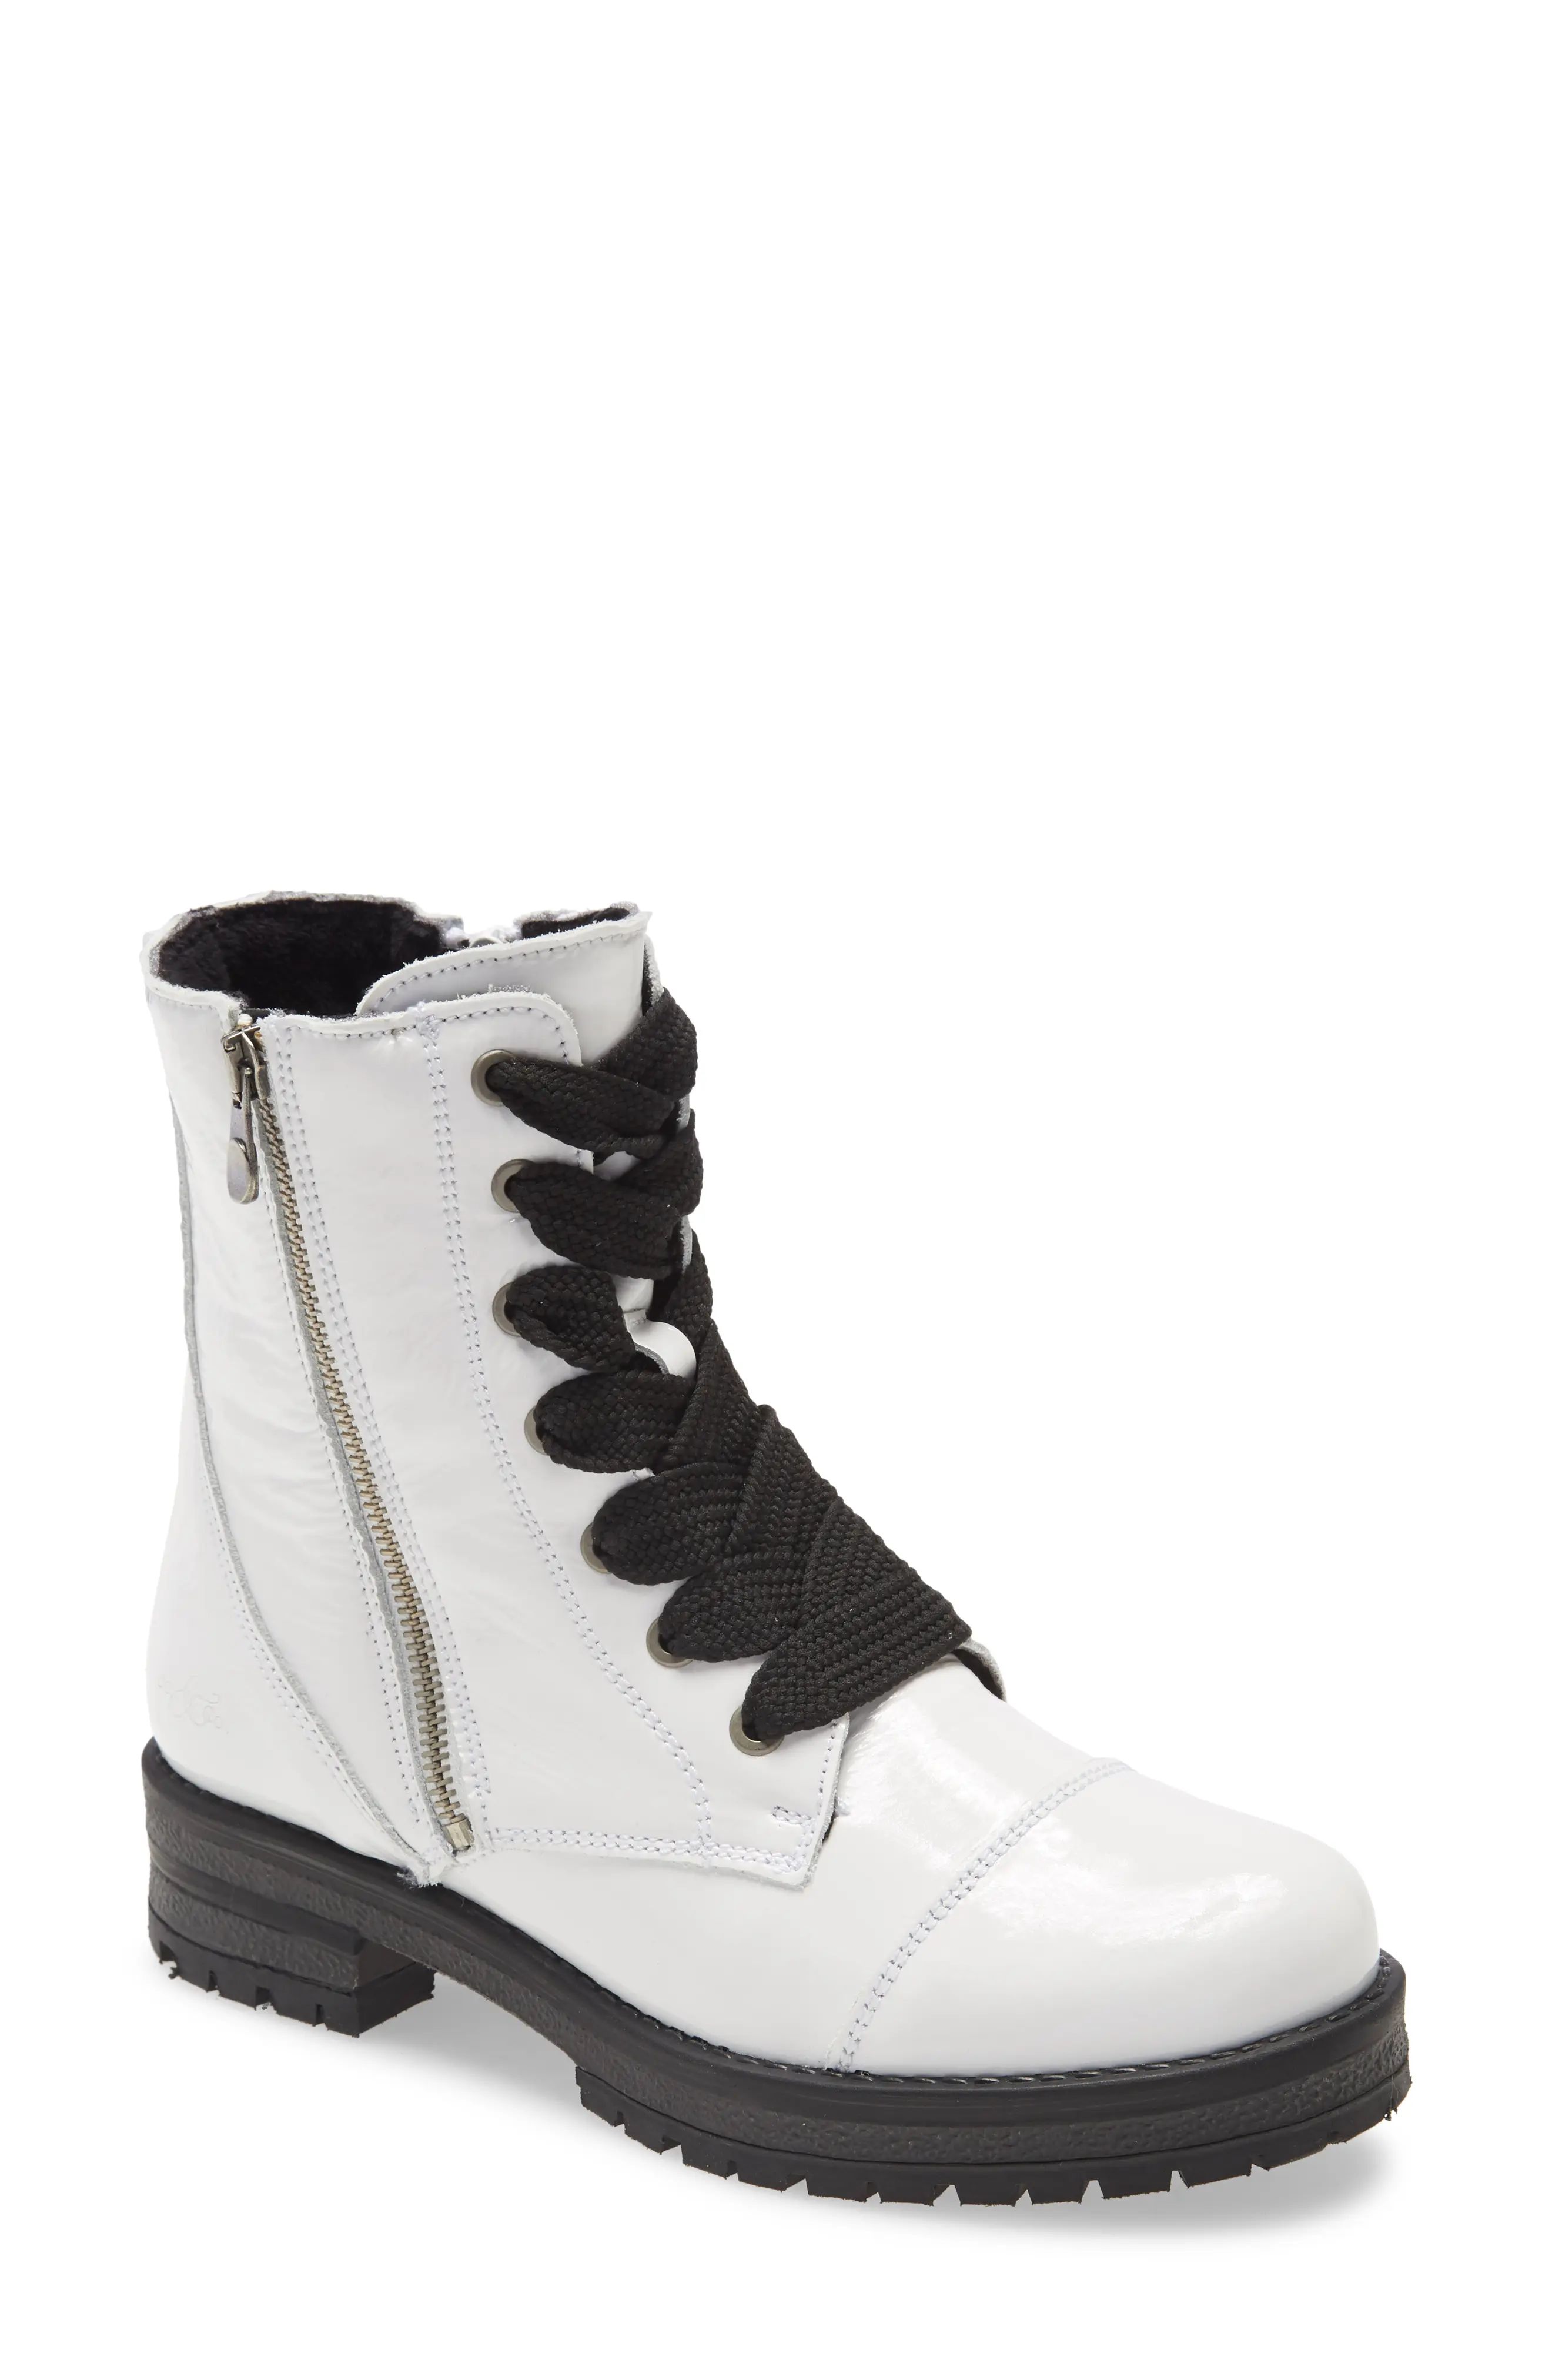 Women's Bos. & Co. Paulie Waterproof Lace-Up Bootie, Size 8-8.5US - White | Nordstrom